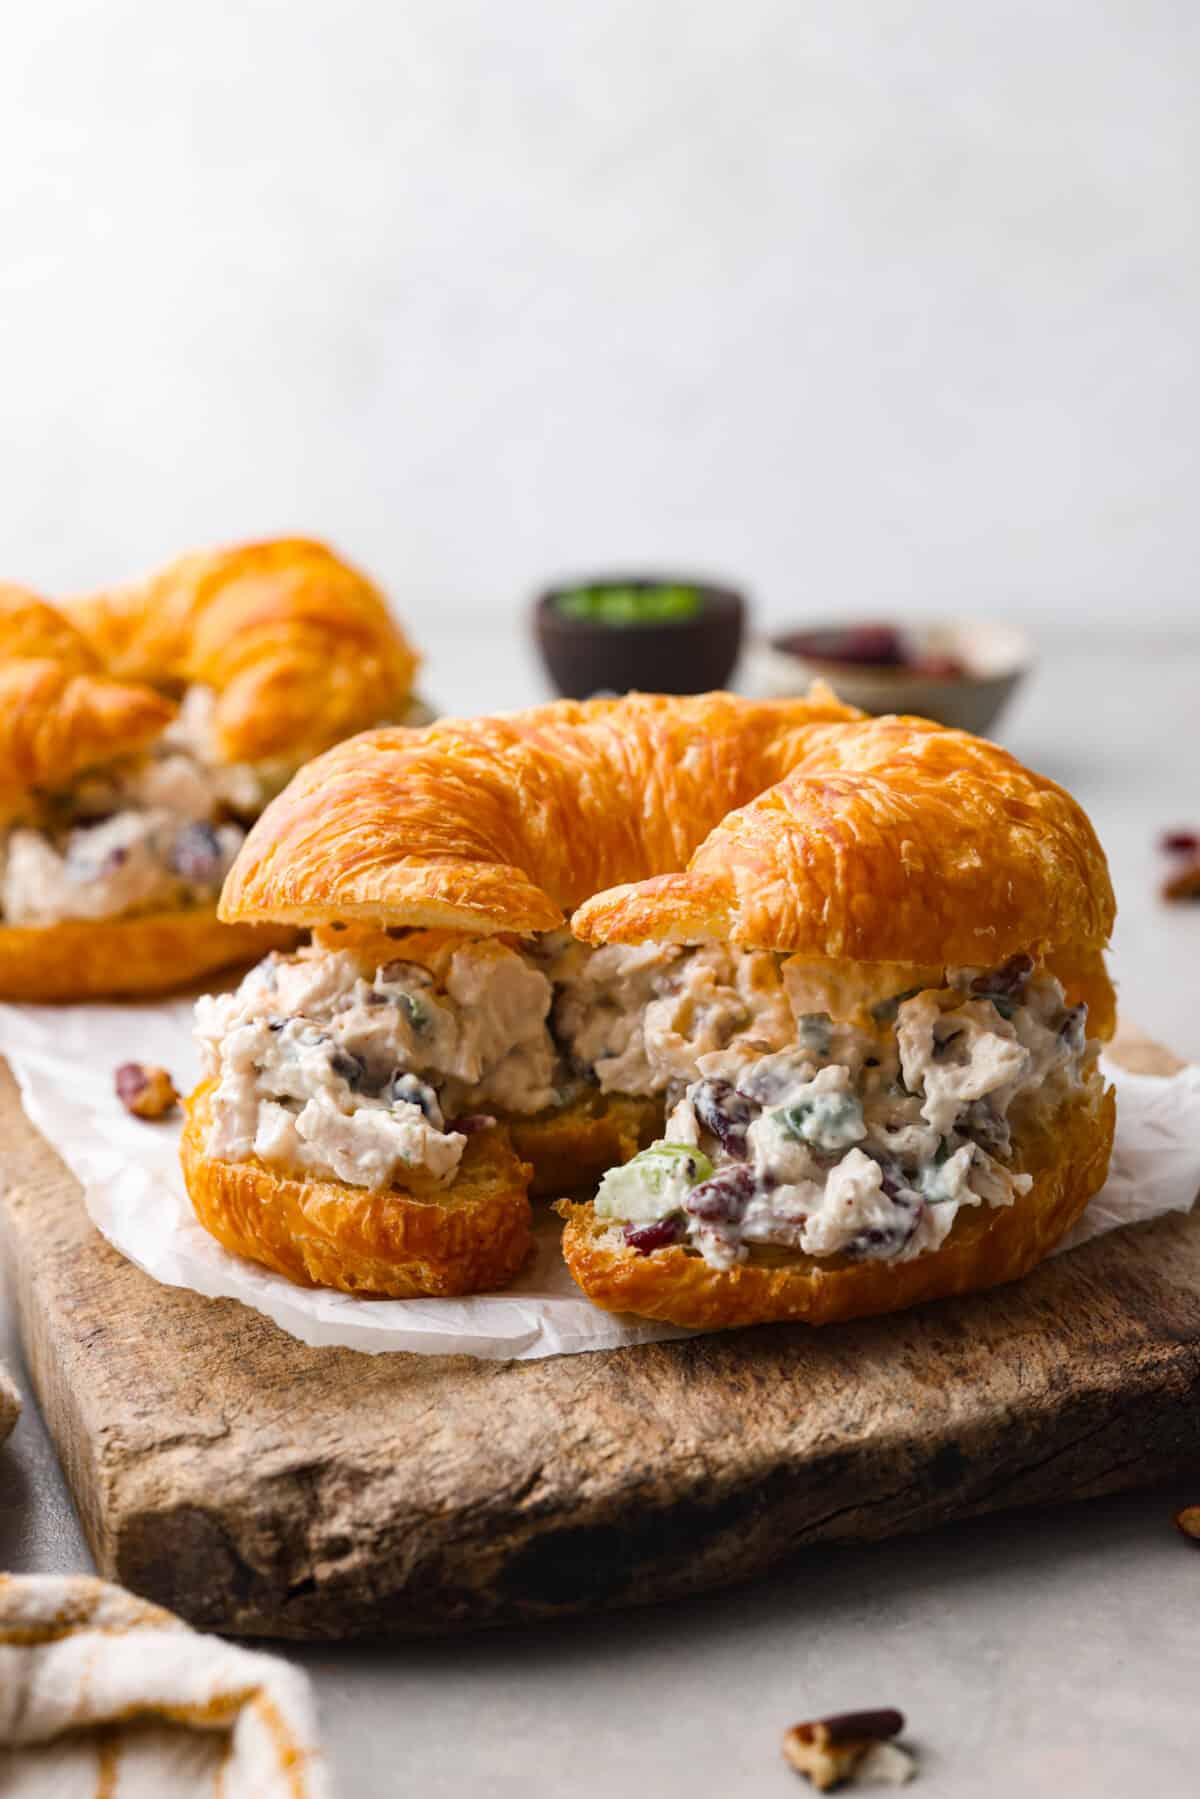 A croissant filled with turkey salad.